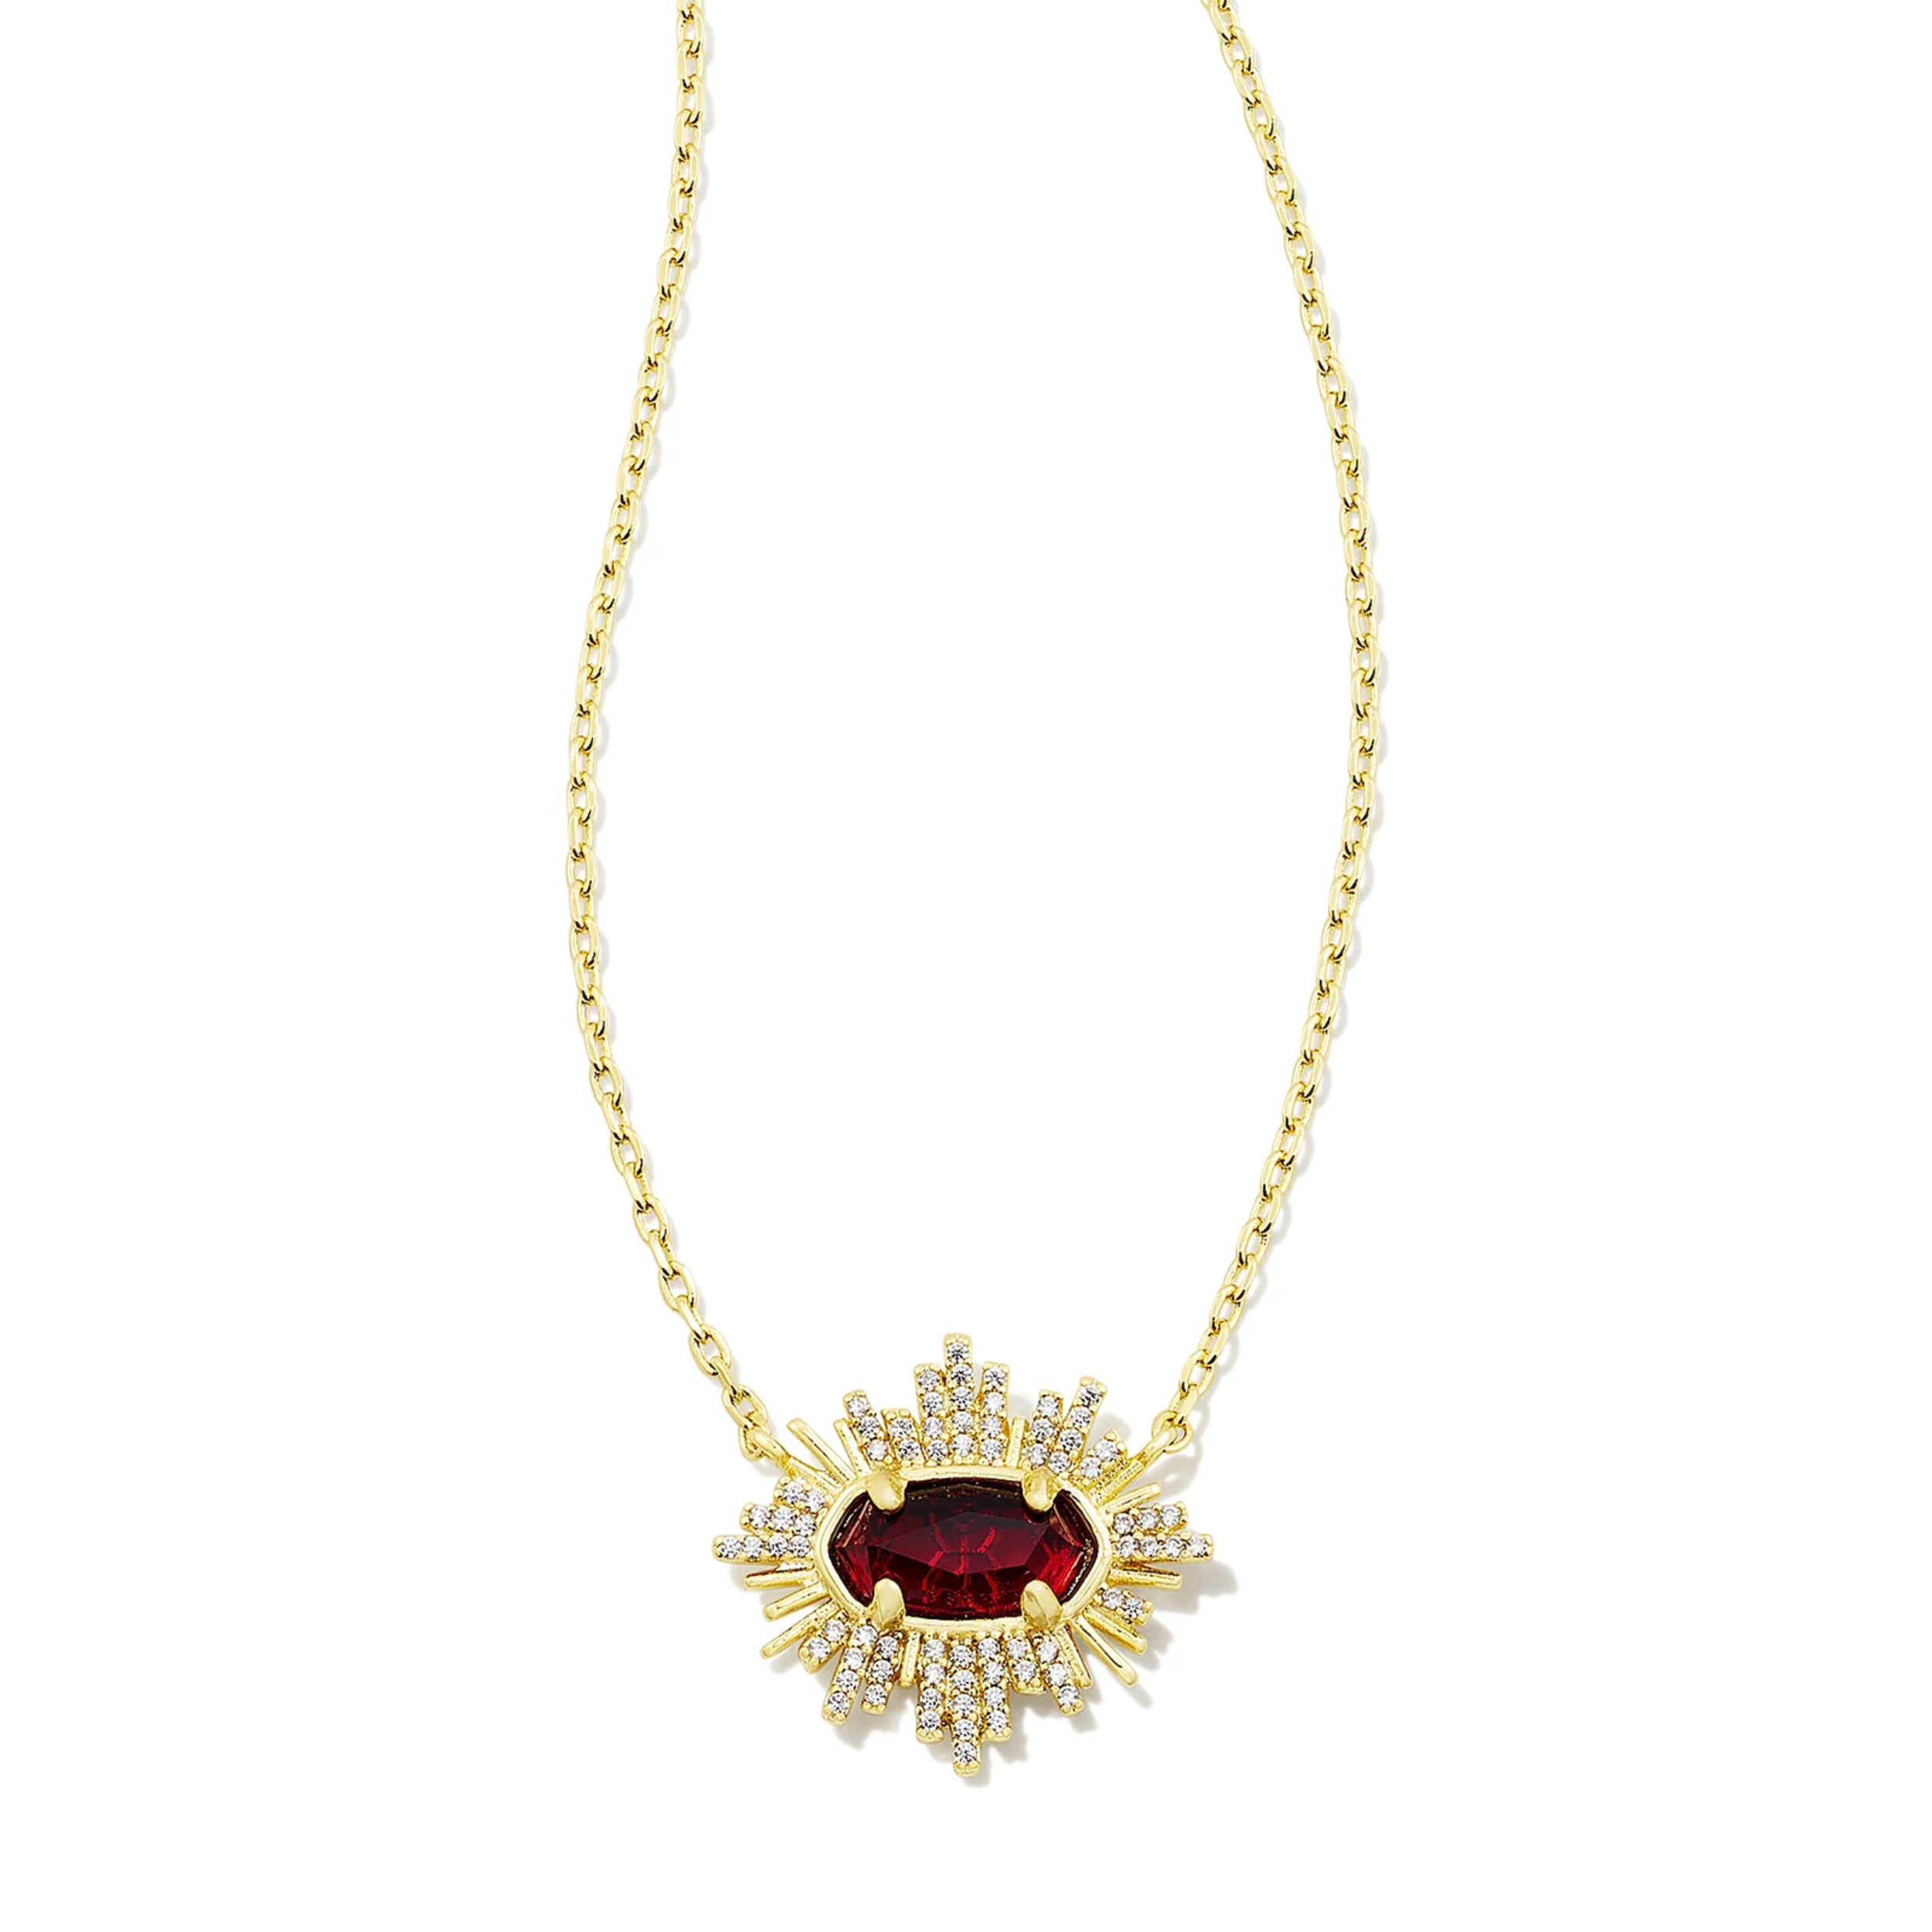 This Grayson Sunburst Gold Frame Pendent in Red Glass by Kendra Scott is pictured on a white background.